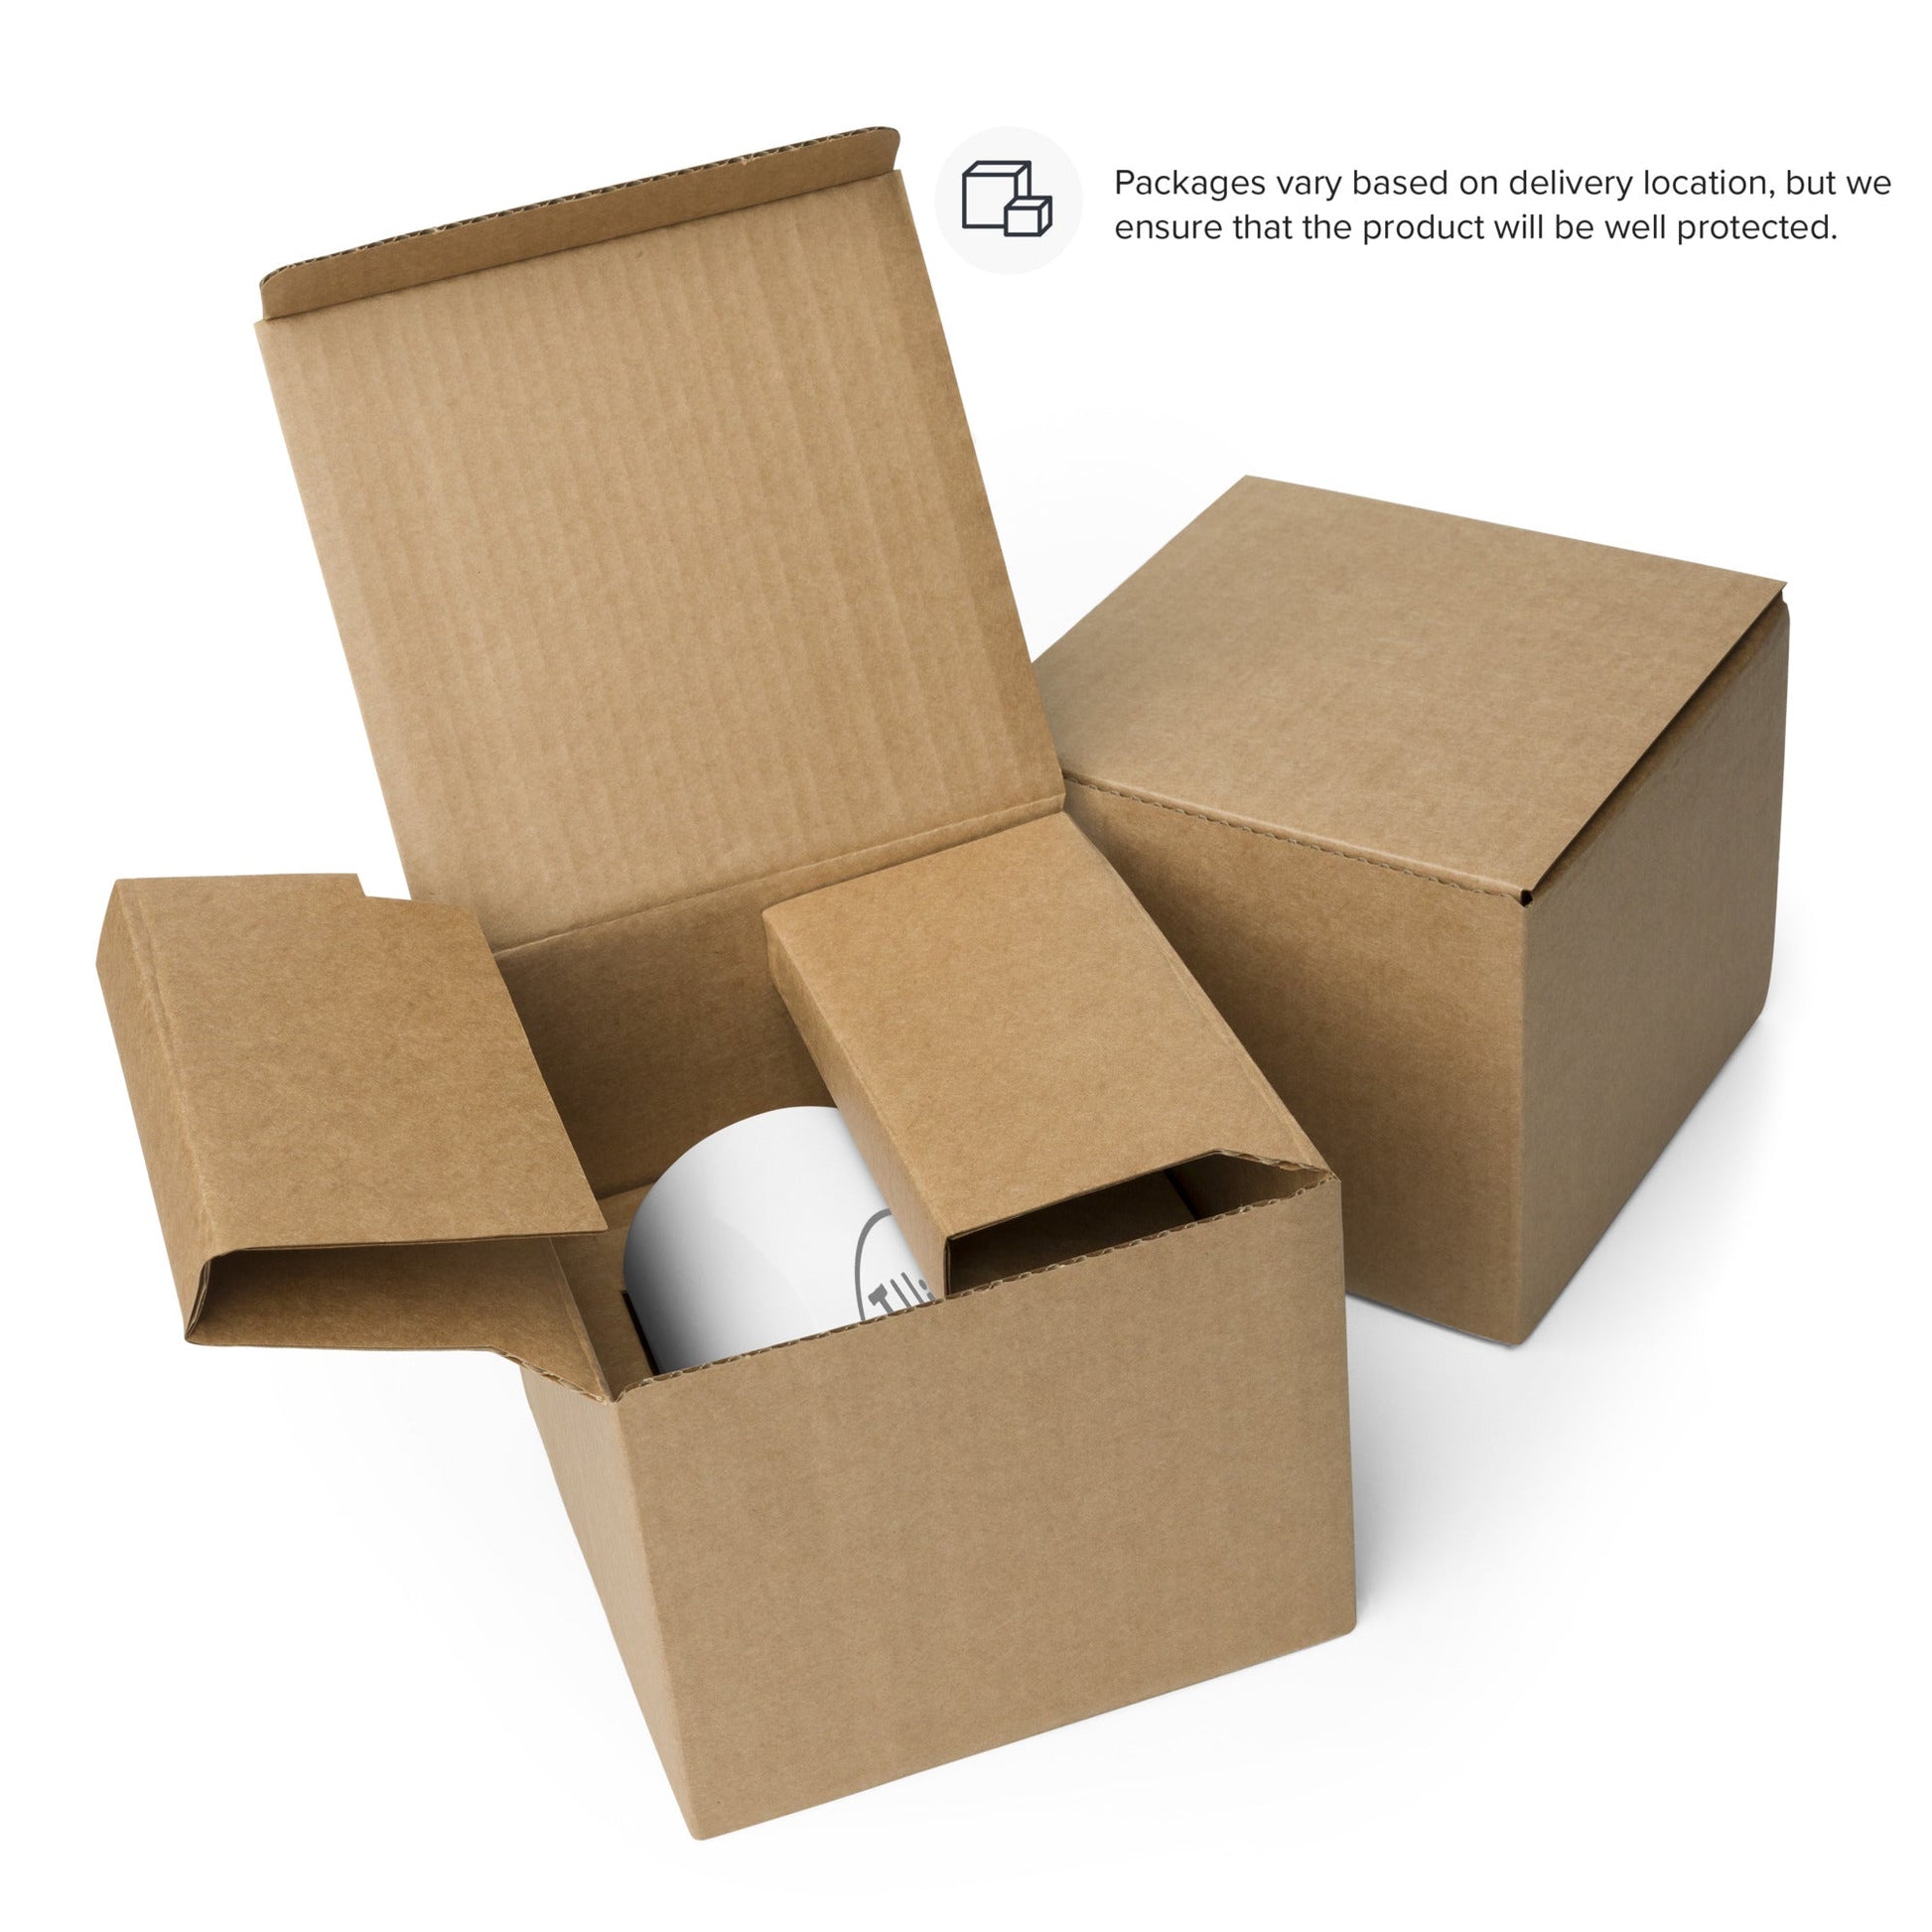 Two open cardboard boxes with one revealing a securely packaged White Glossy Mug Grey THiNK LiKE A DOG® Logo inside, designed for dog lovers and inscribed with the motto "Think Like a Dog" by THiNK LiKE A DOG®.